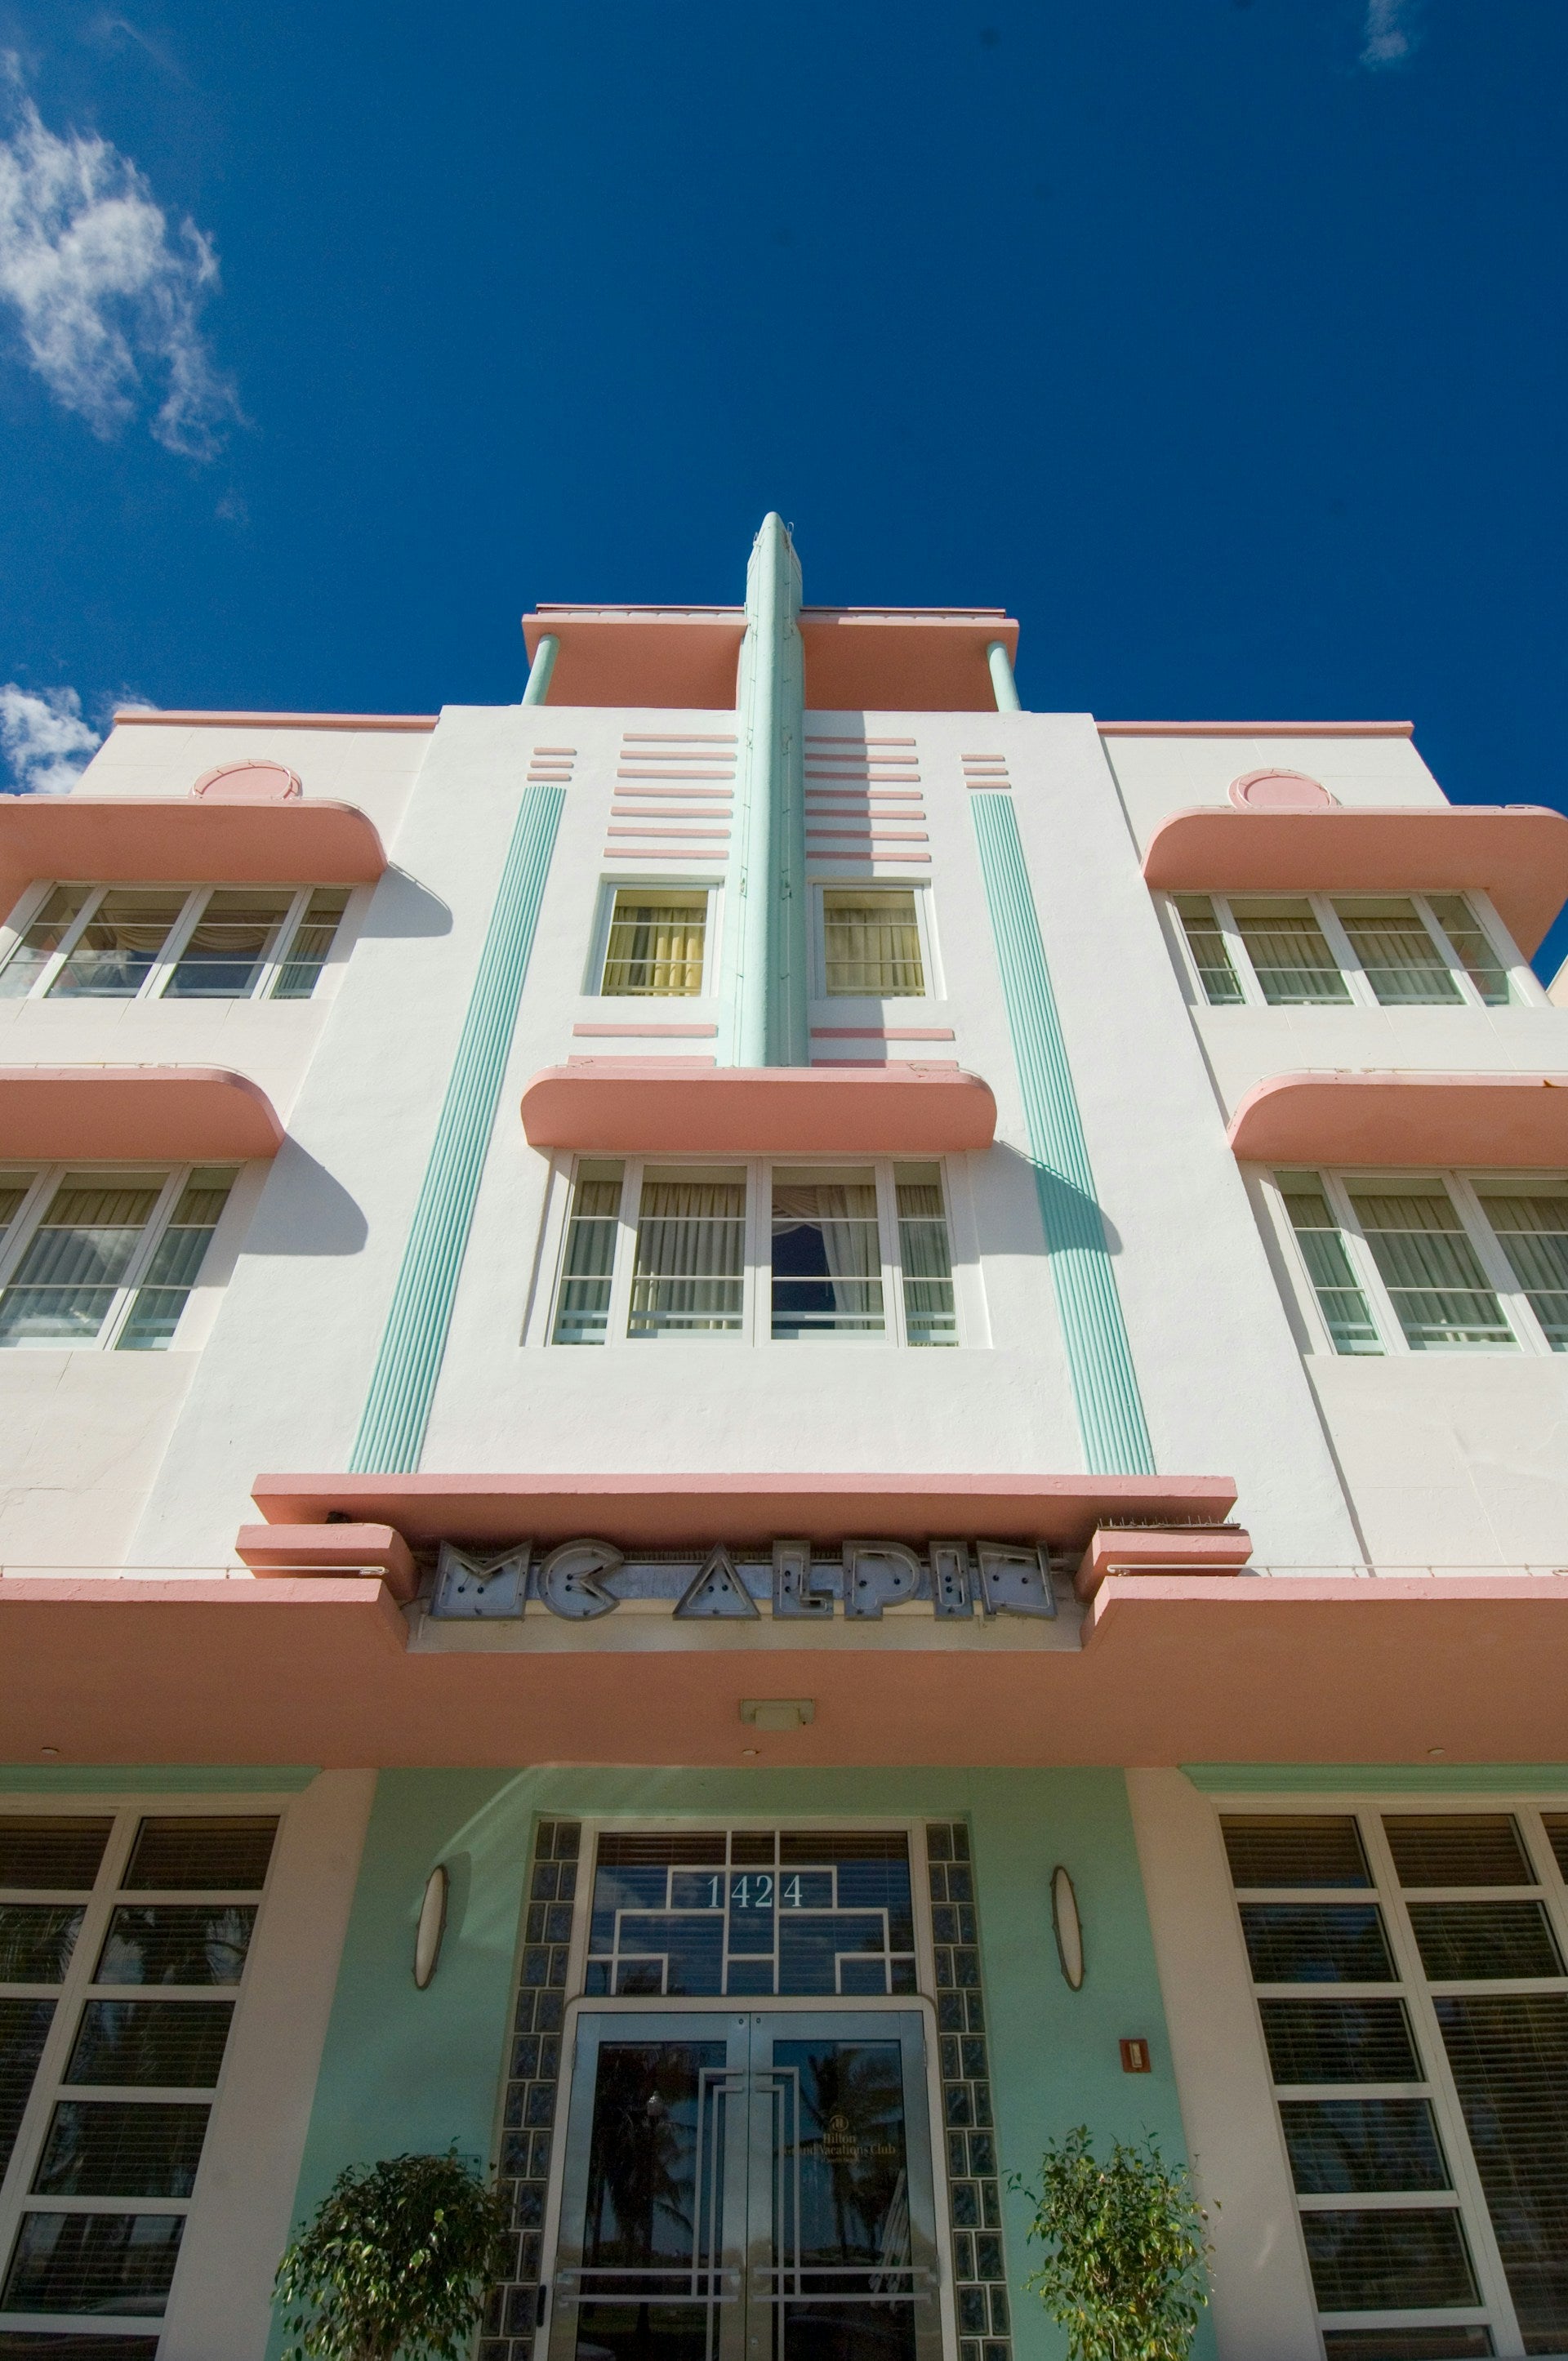 An art deco style building in Miami, Florida.